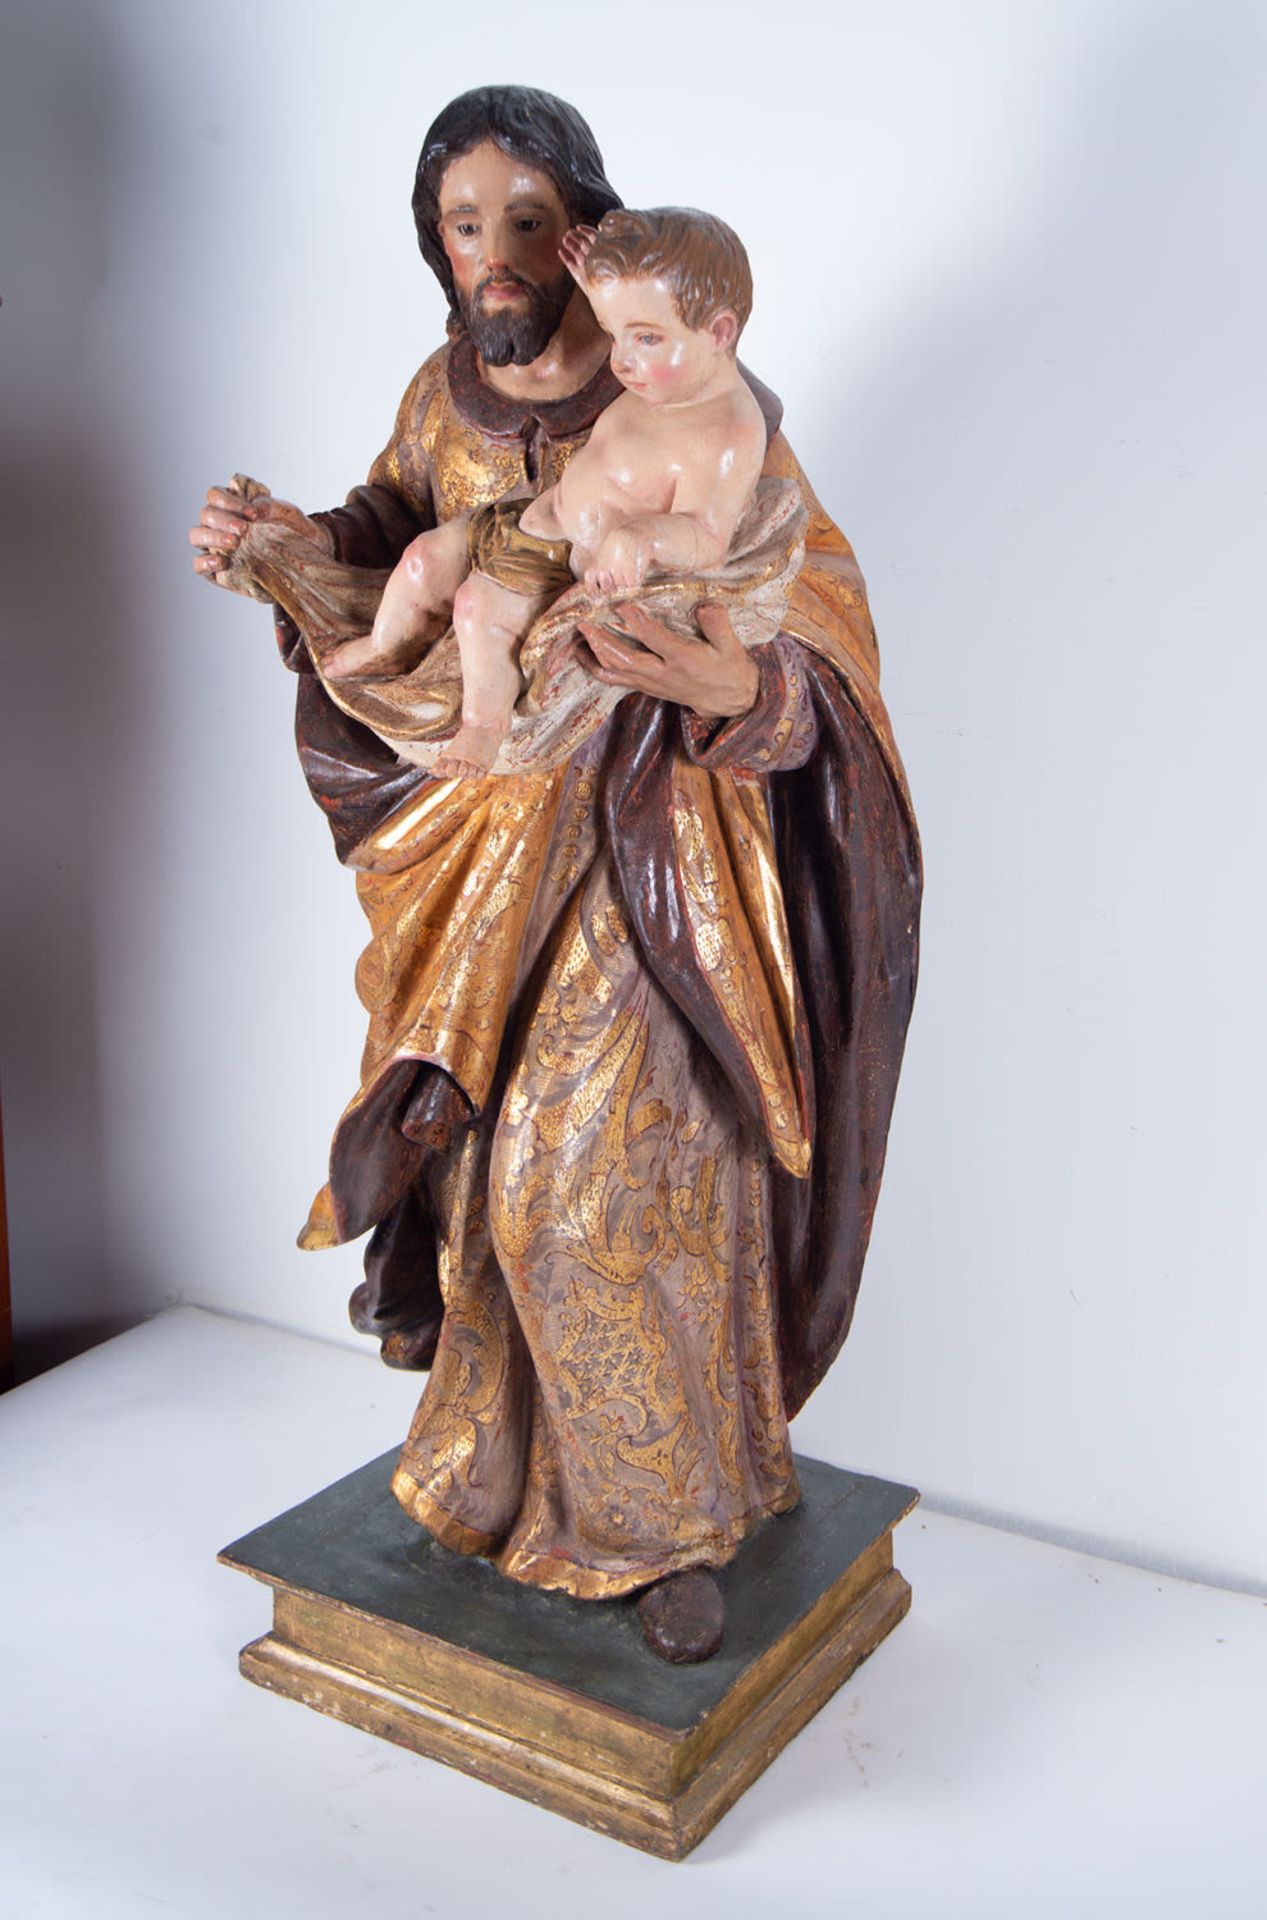 Saint Joseph with Child in Arms, Sevillian school of Pedro Roldán from the end of the 17th century - Image 3 of 6